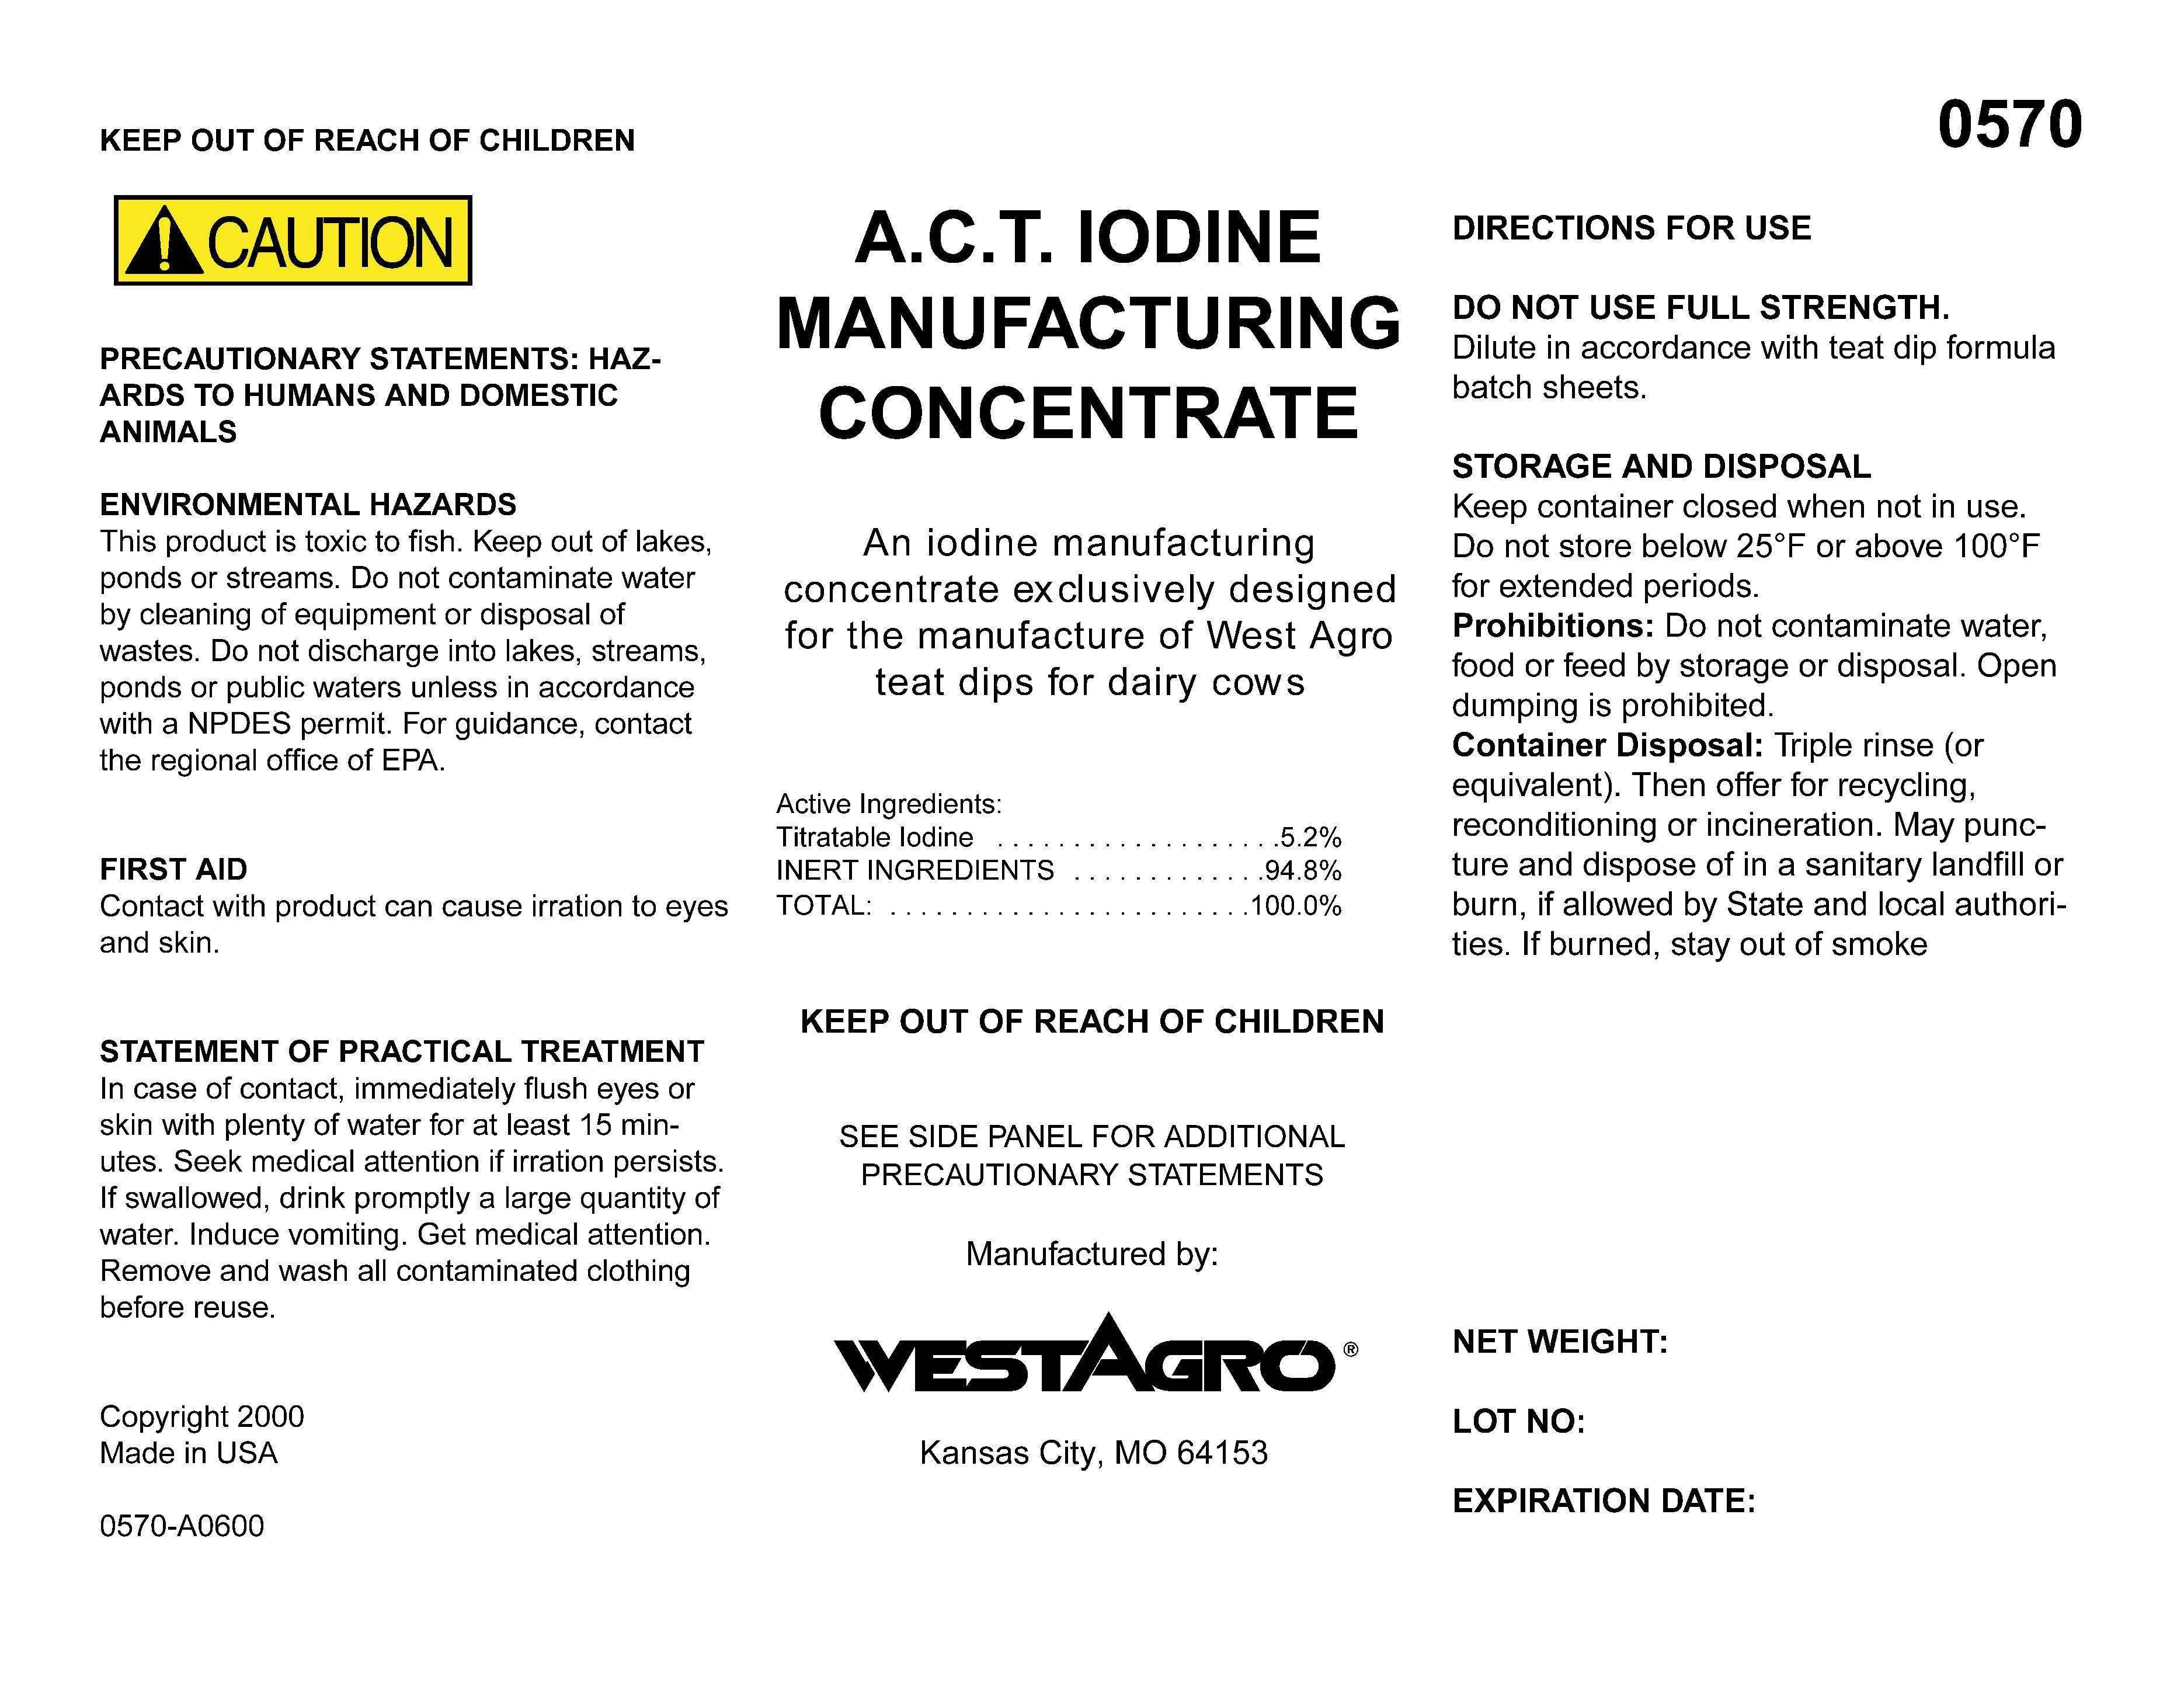 A.C.T. Iodine Manufacturing Concentrate